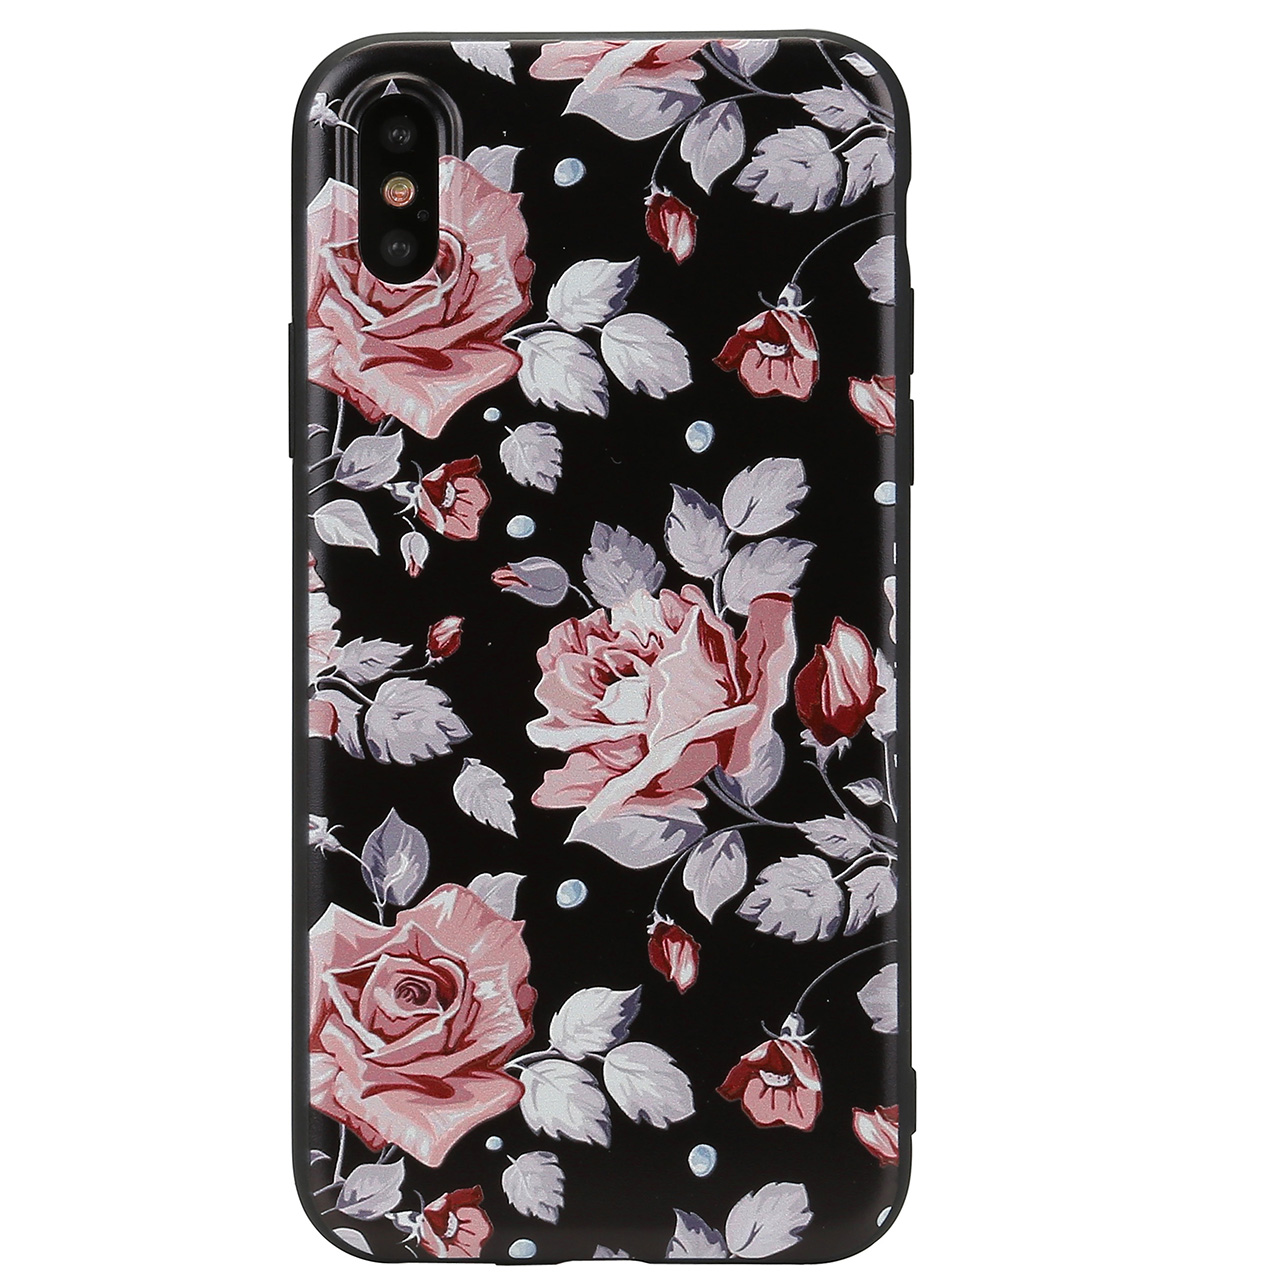 ACBungji iPhone X case Embossment Print Lightweight Soft Flexible TPU Protective Cover Case for iPhone X -Pink Peony